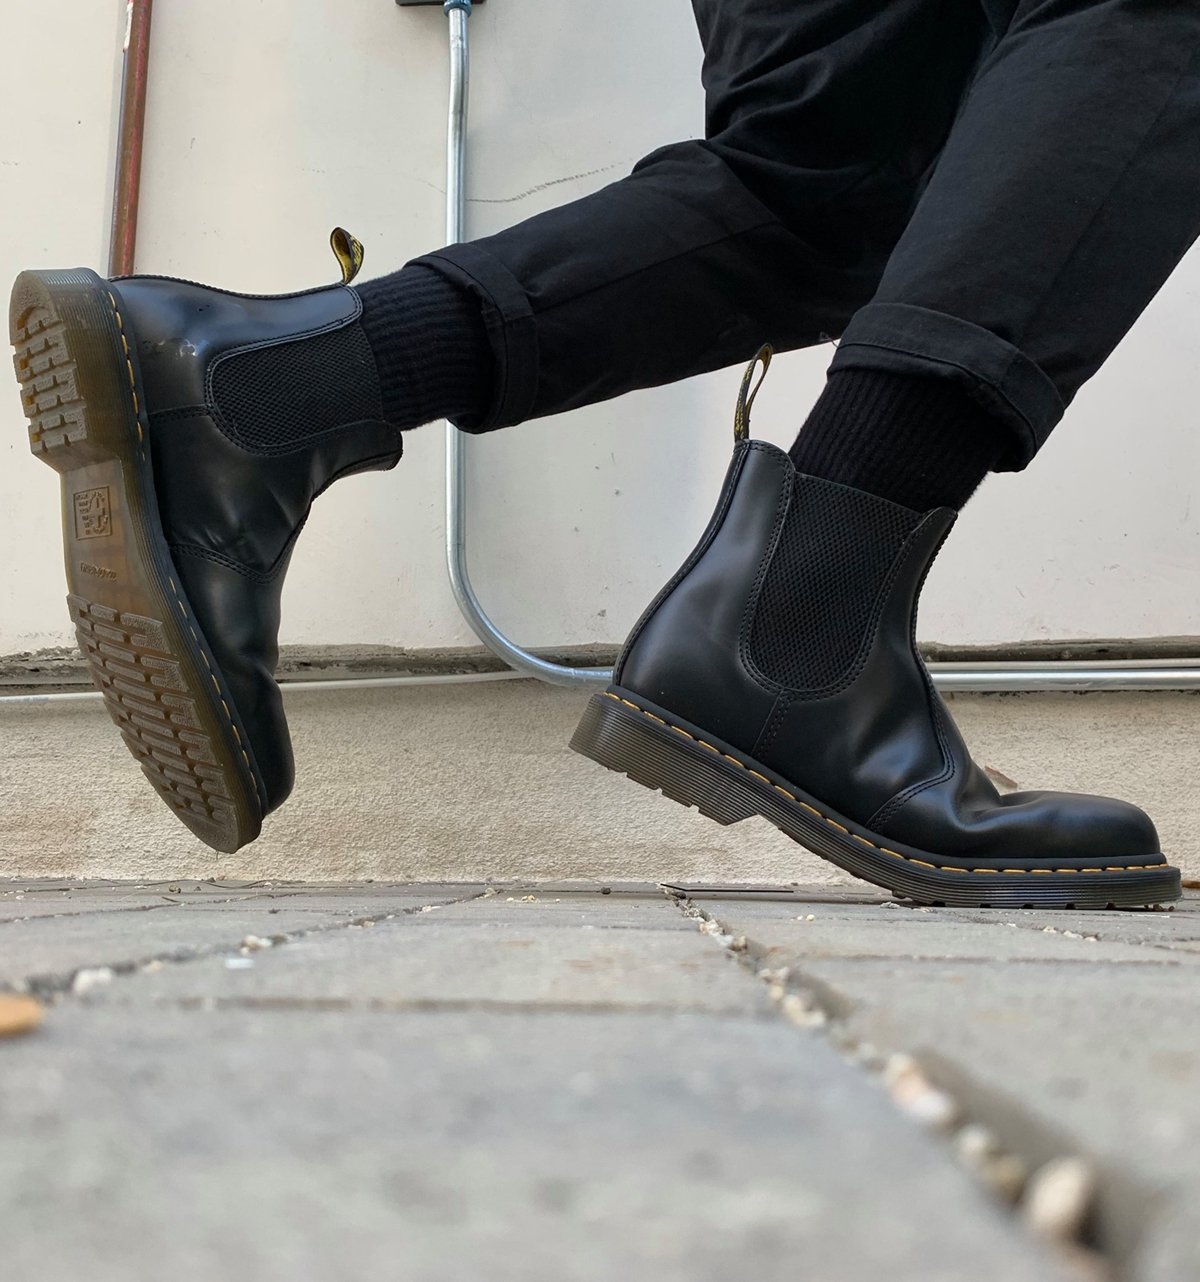 Introduced in the early 1970s, 2976 is the original Dr. Martens Chelsea boot with Victorian origins